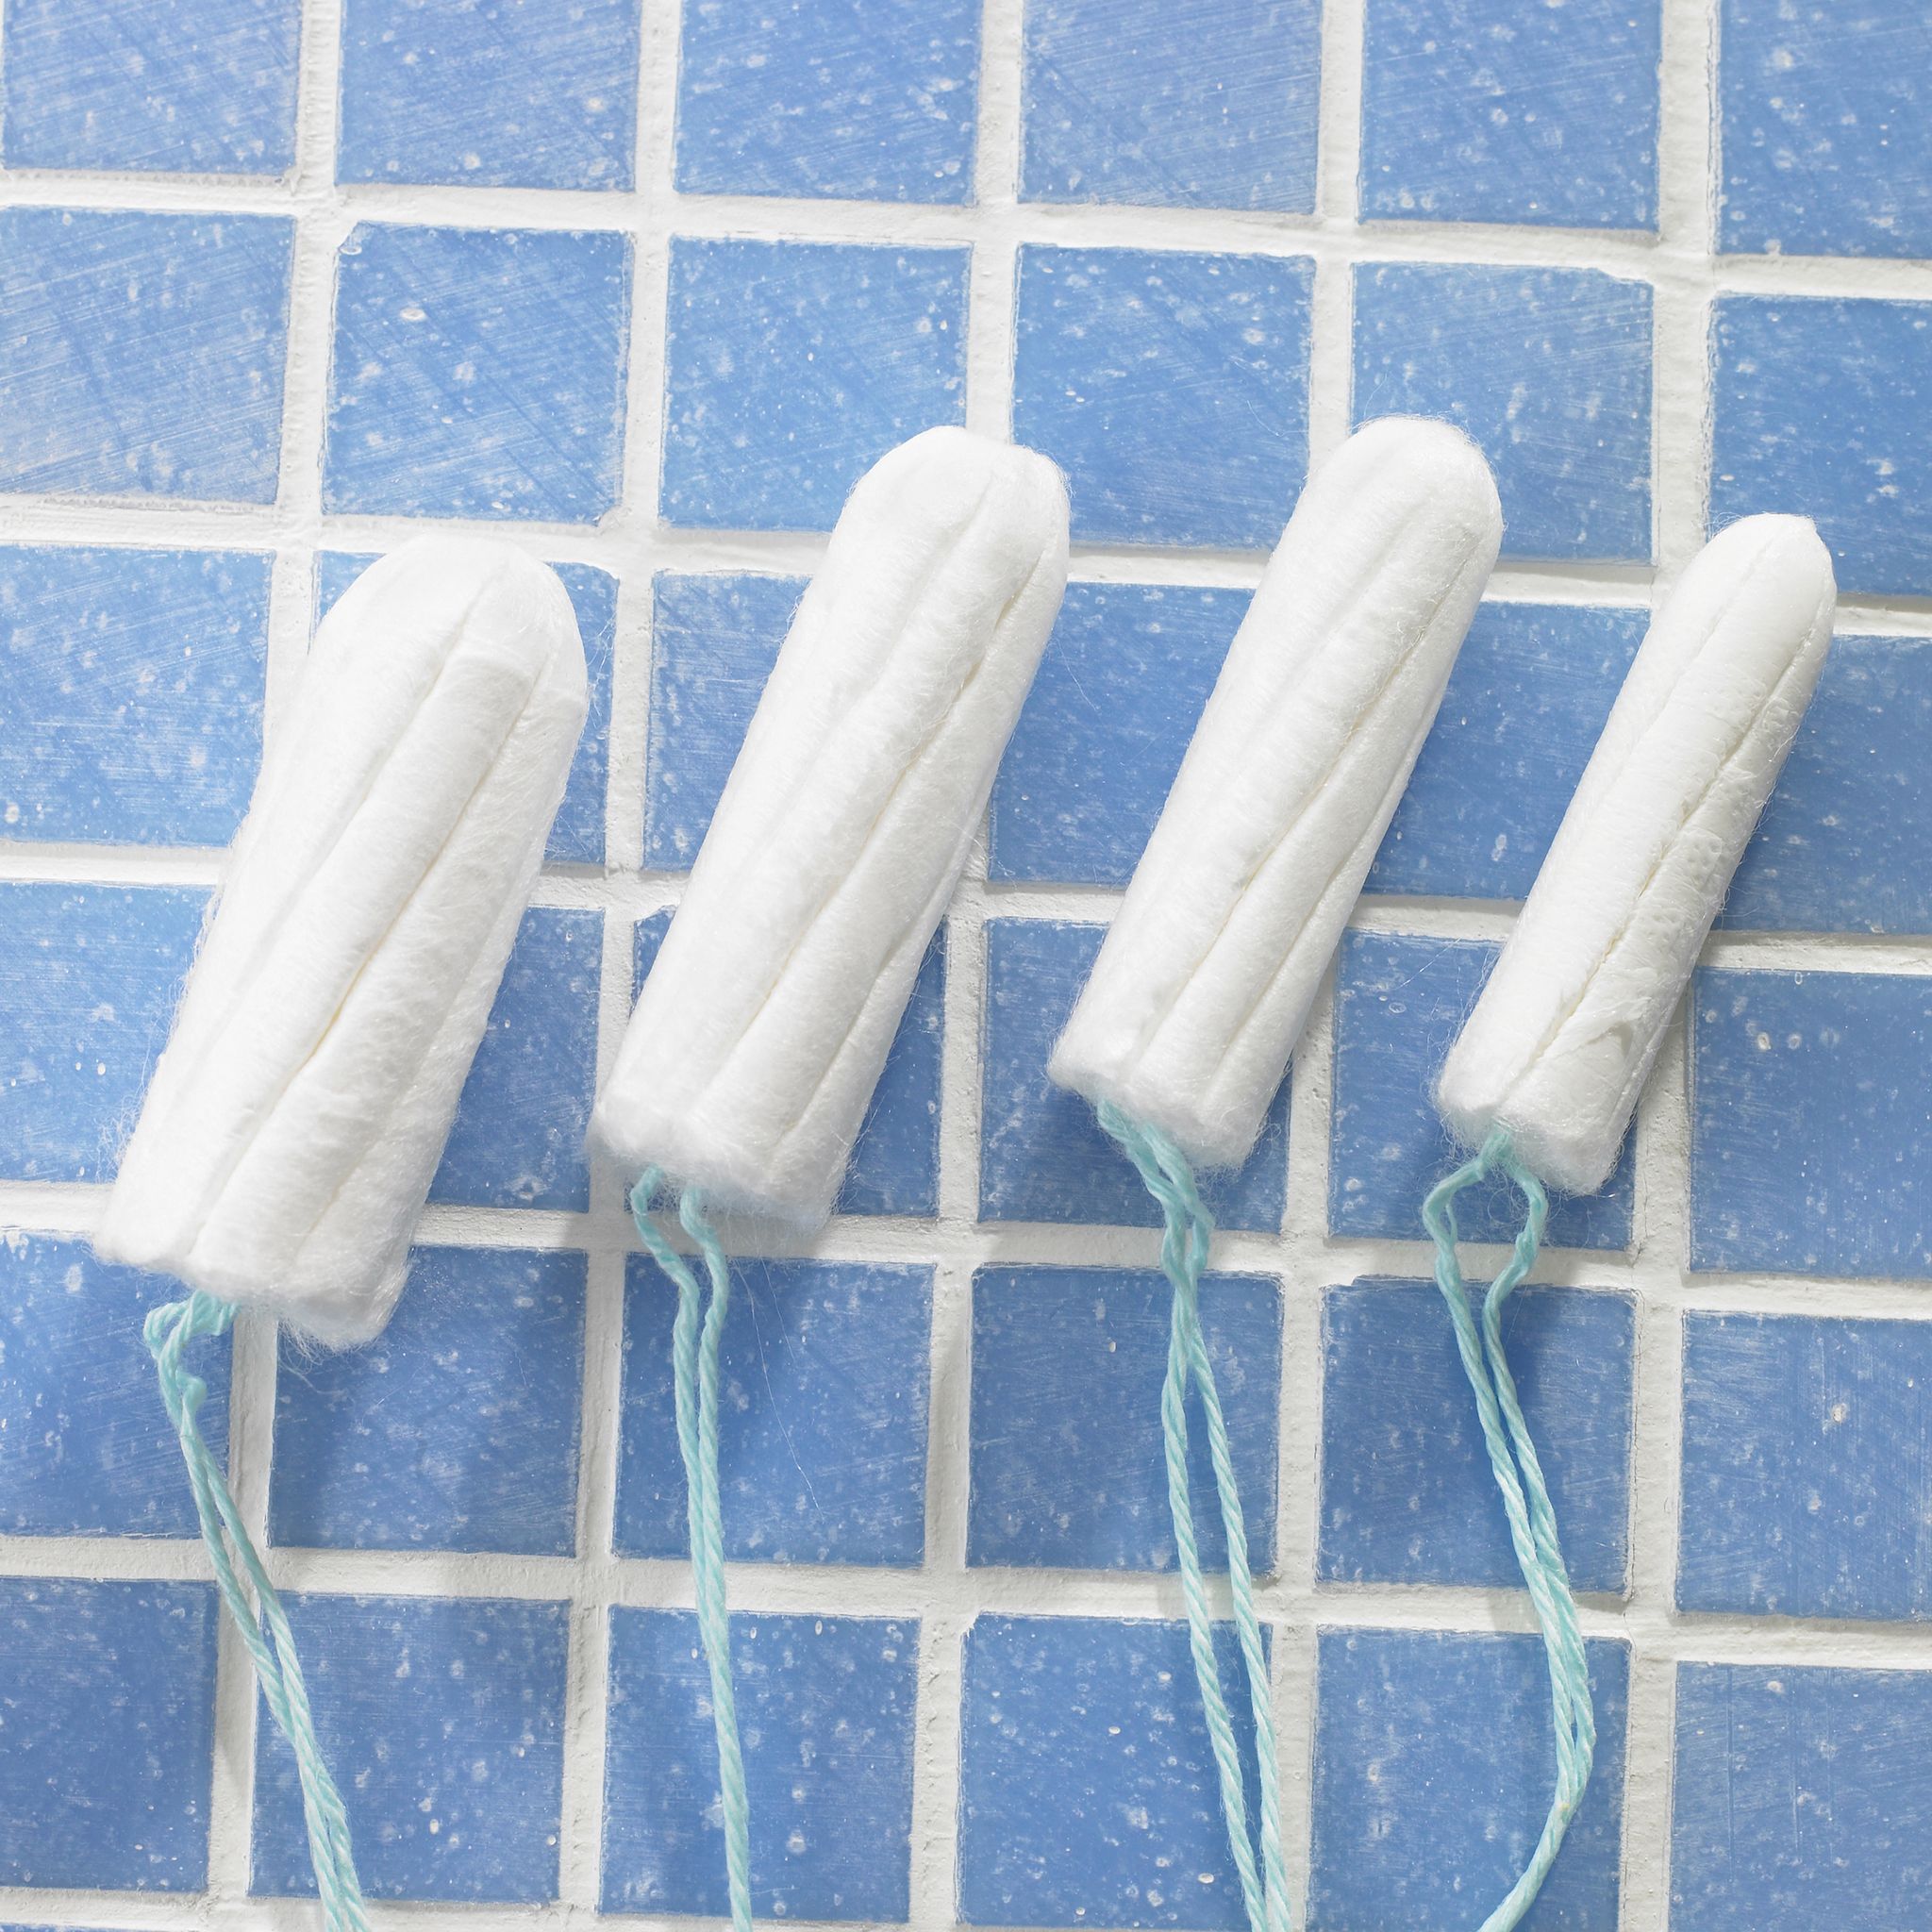 Toxic shock syndrome (TSS) & your period products